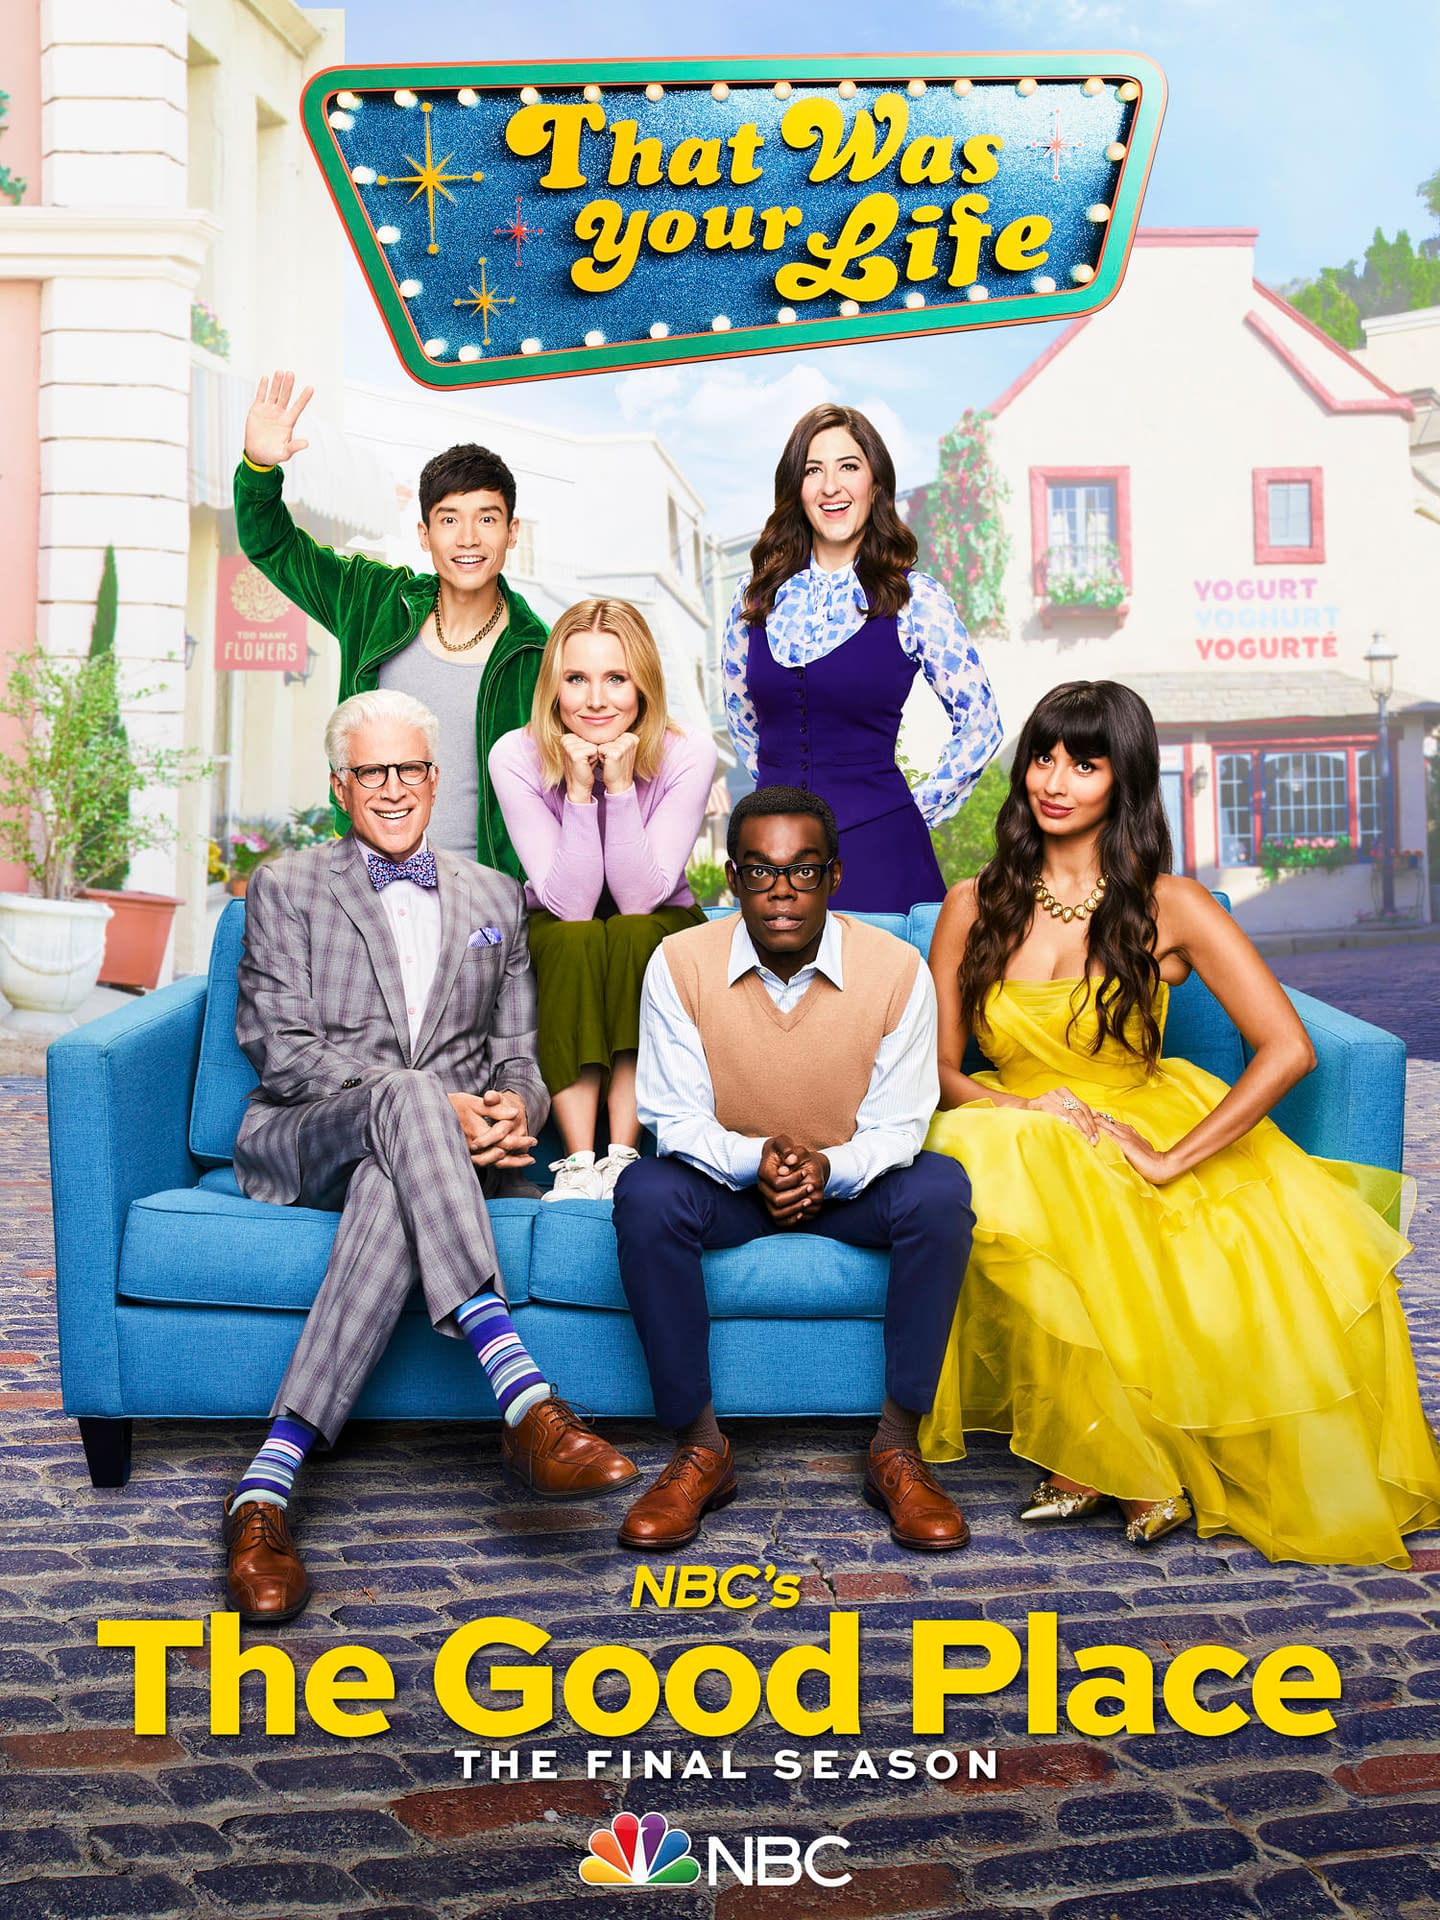 "The Good Place" Season 4: "Cooler Clothes" Eleanor, New Janet &#038; More [PREVIEW IMAGE]